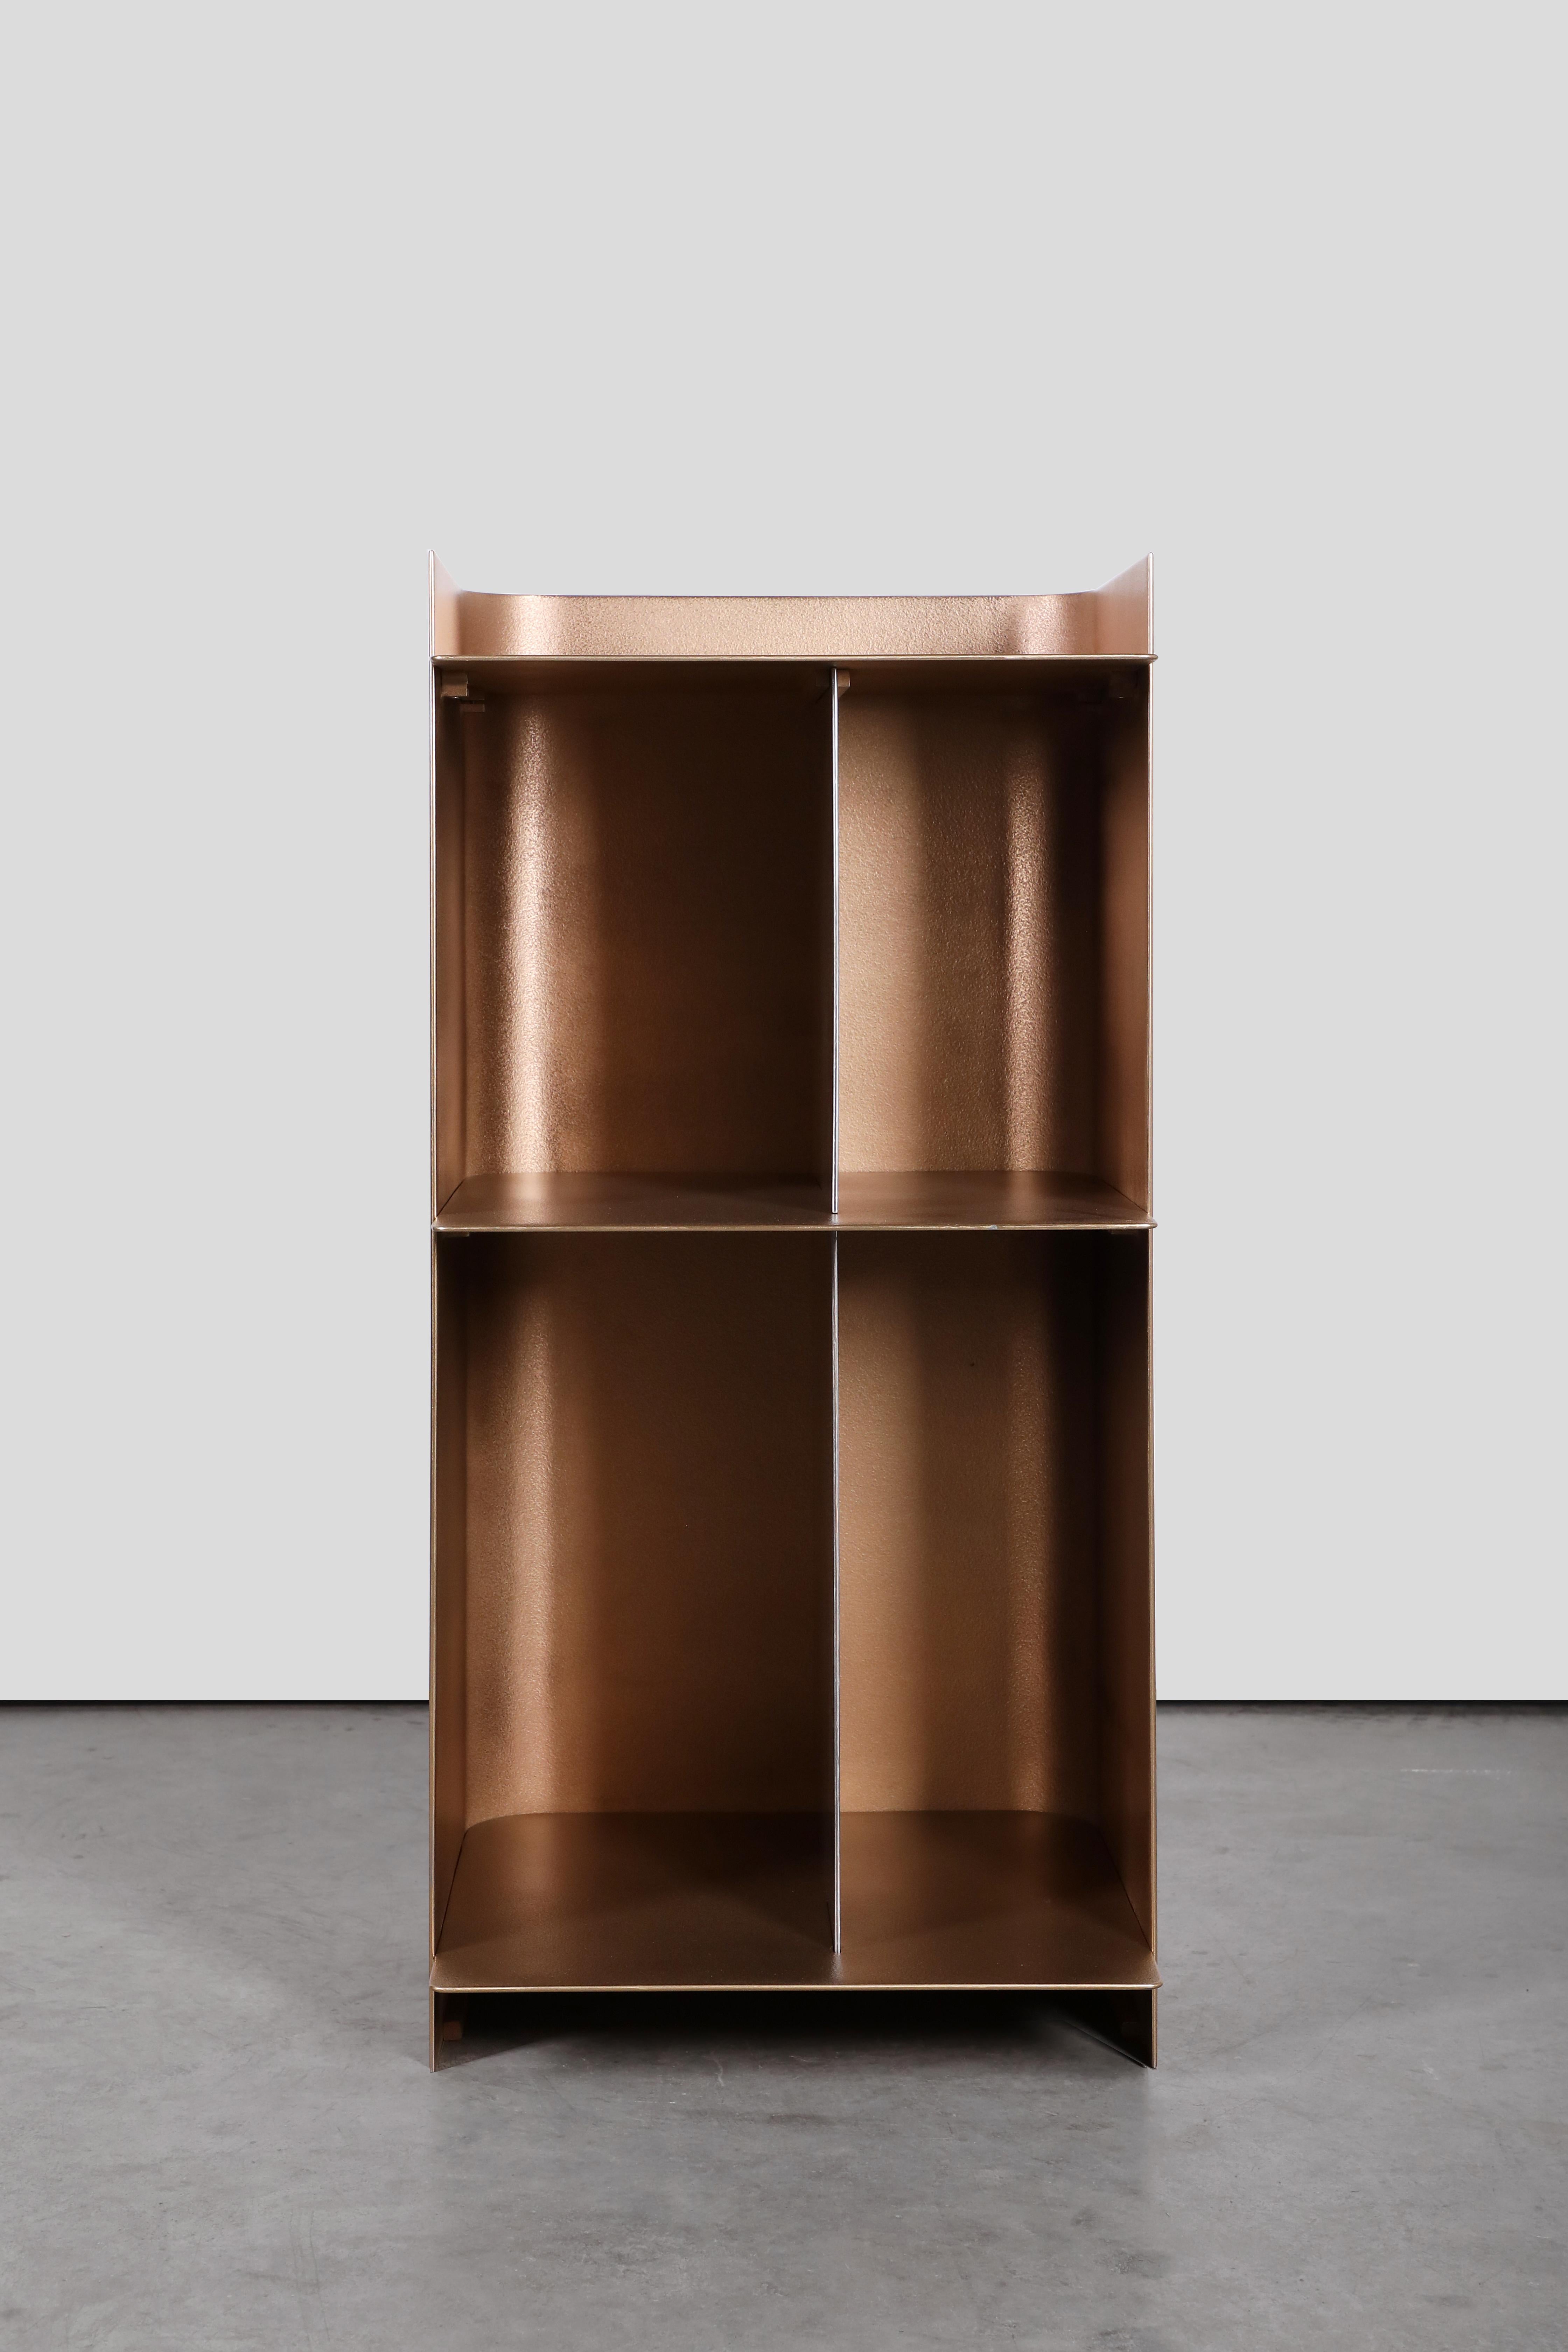 Marcin Rusak Studio’s merging metals collection focuses on showcasing the painterly qualities of merging metals, with the aim to instil artistic expression into the industrial processes associated with this material. The collection adopts a metal